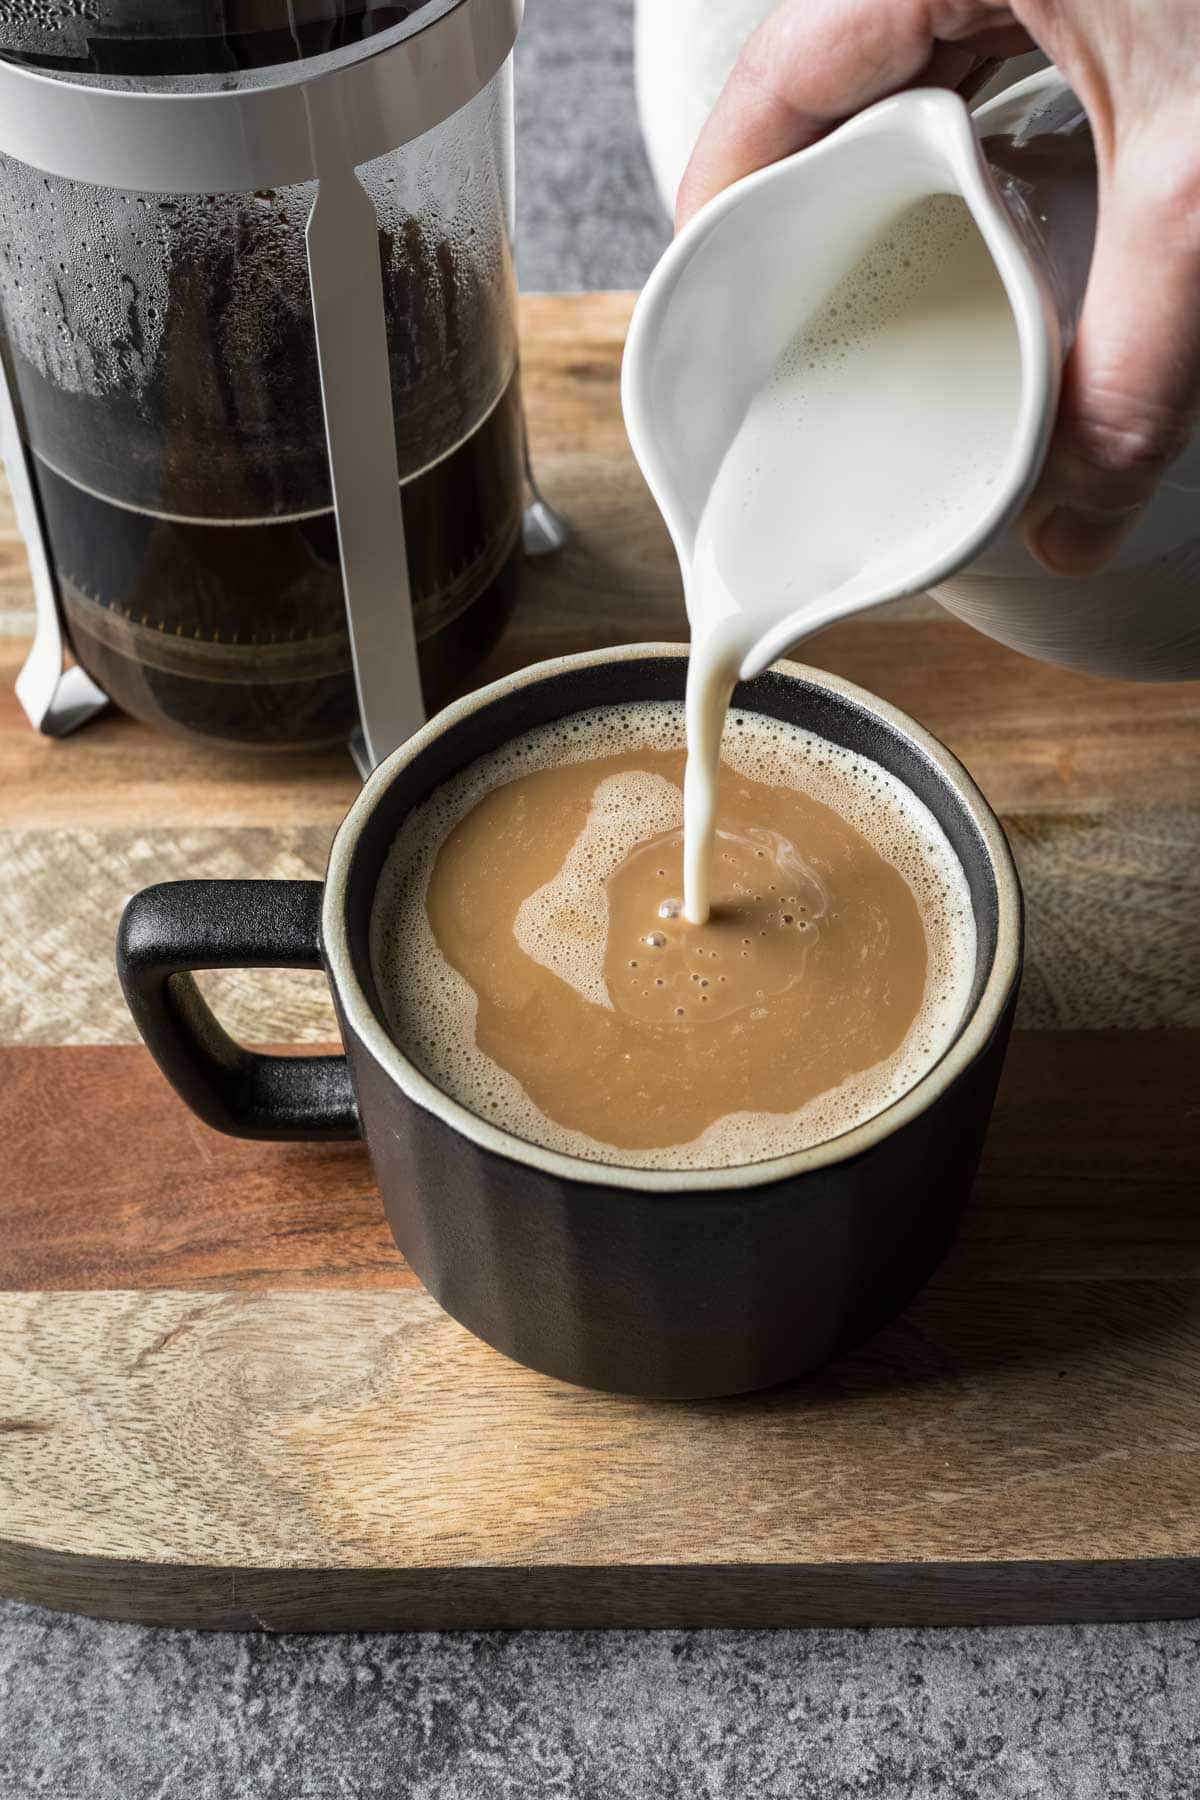 Pouring oat milk creamer from a jar into a mug of coffee.